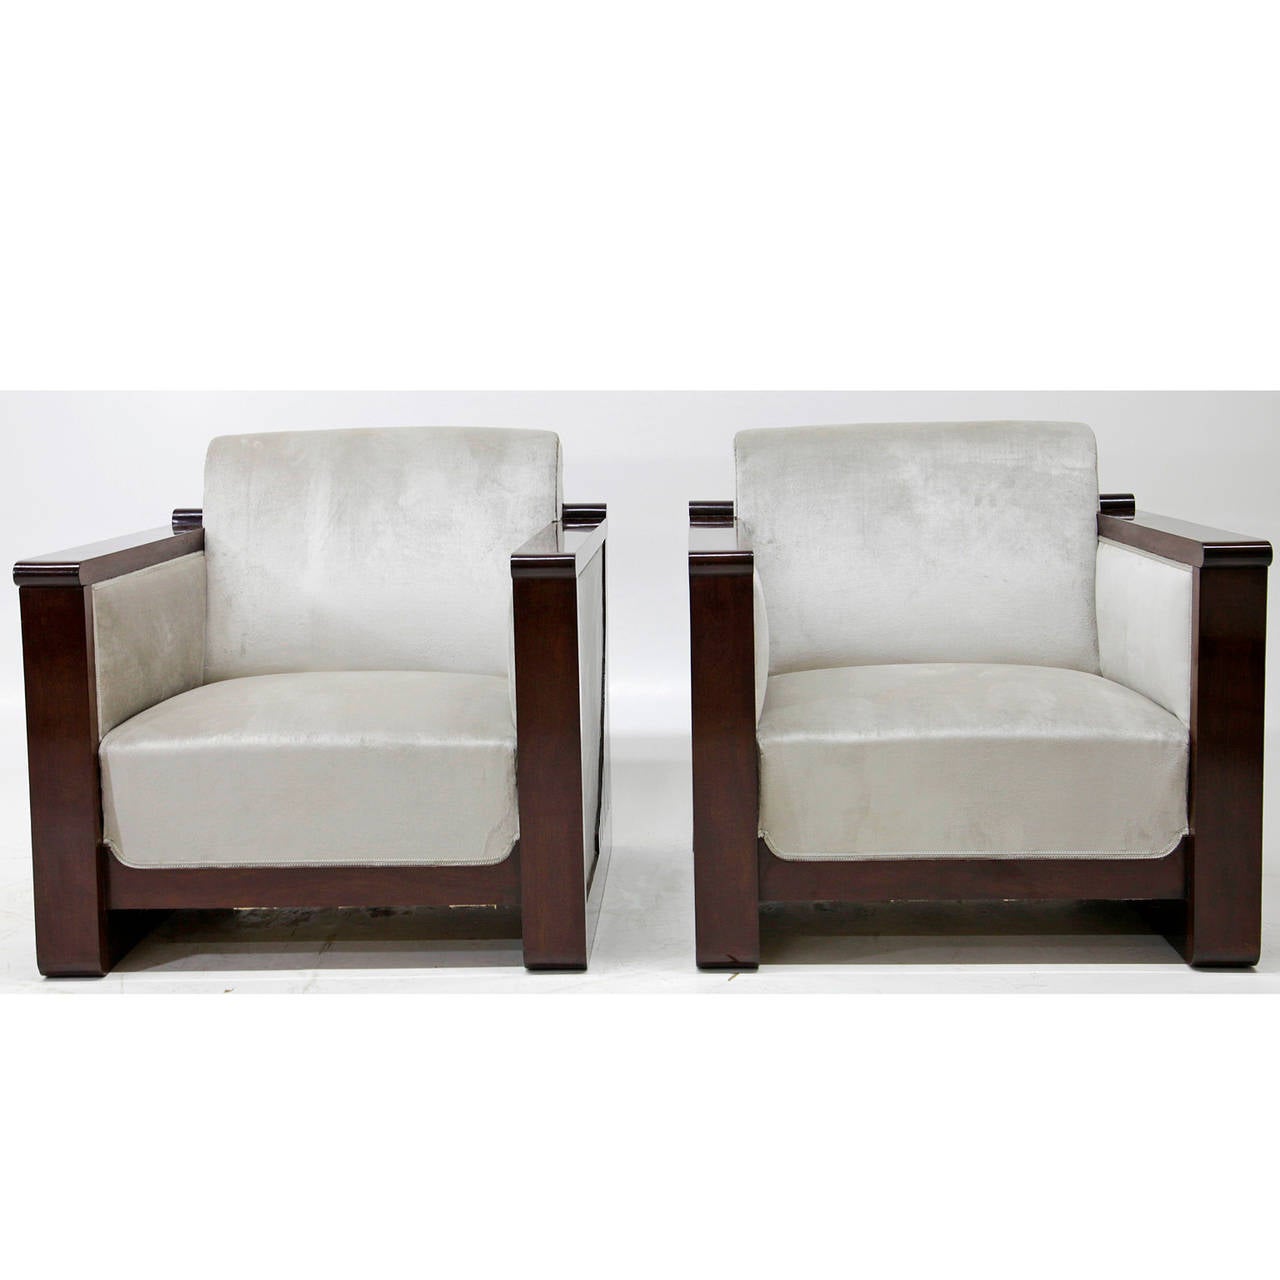 Pair of French Art Deco Armchairs with Grey Fabric, circa 1920s In Good Condition For Sale In Greding, DE